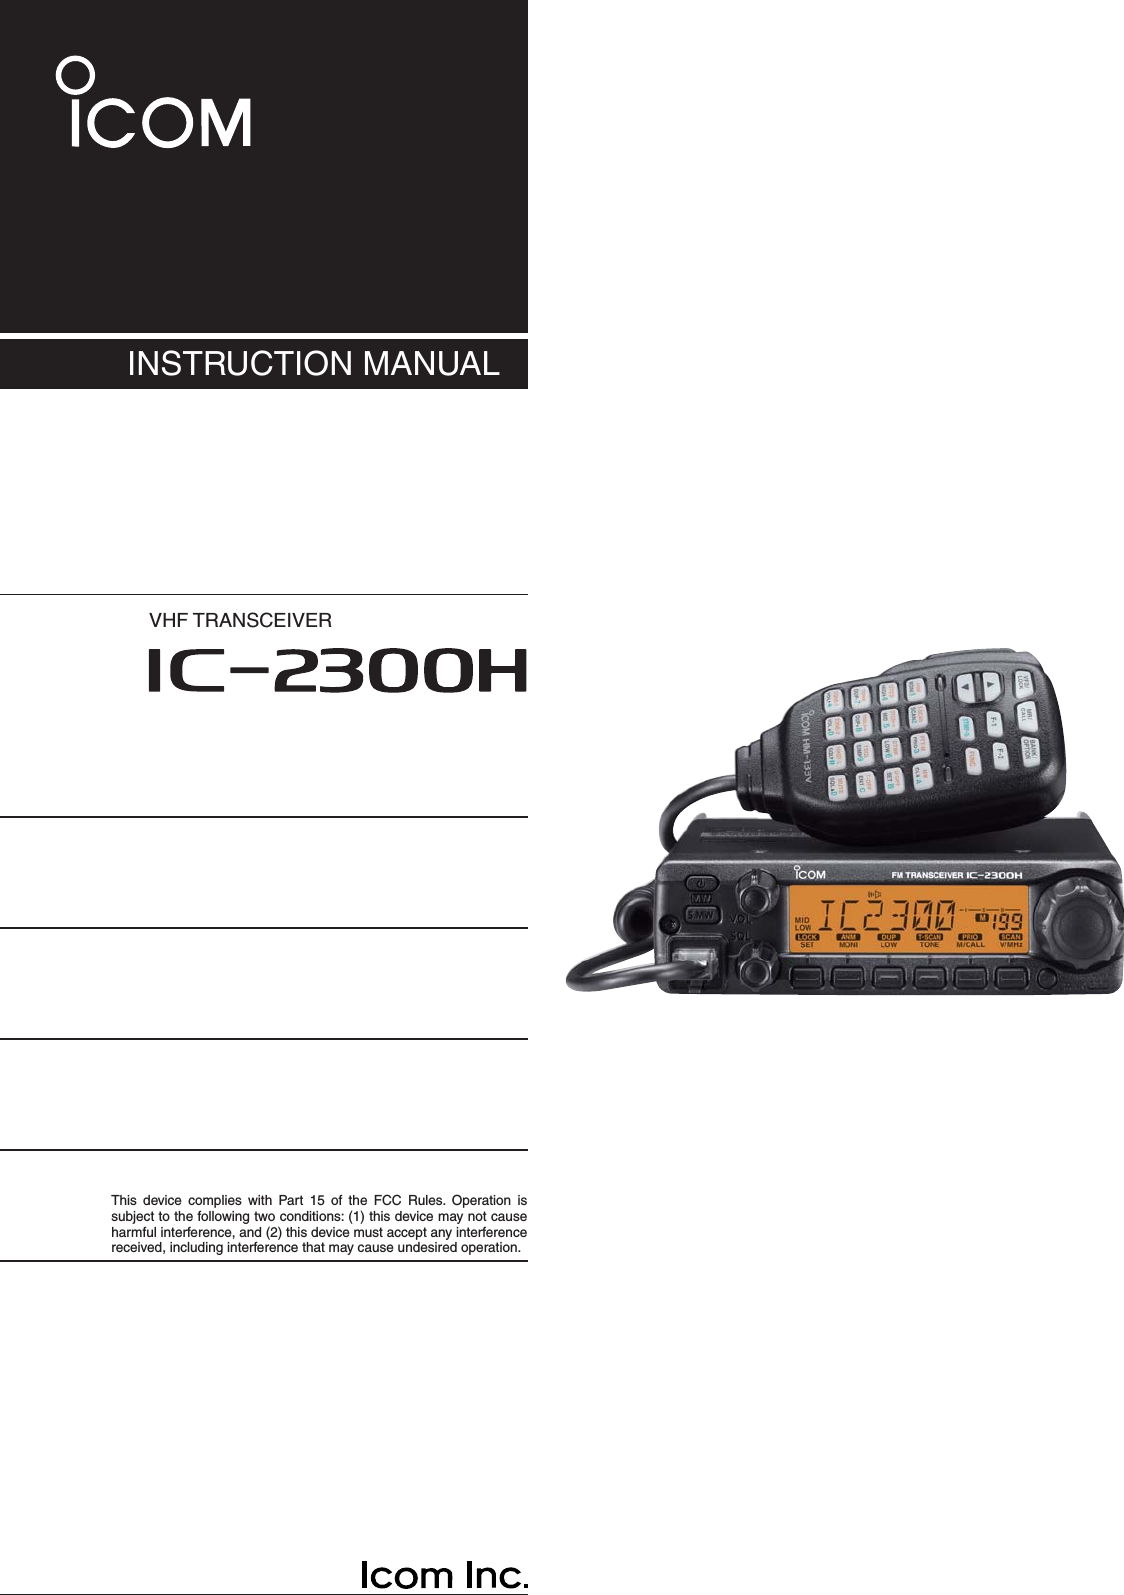 VHF TRANSCEIVERThis device complies with Part 15 of the FCC Rules. Operation is subject to the following two conditions: (1) this device may not cause harmful interference, and (2) this device must accept any interference received, including interference that may cause undesired operation.INSTRUCTION MANUAL